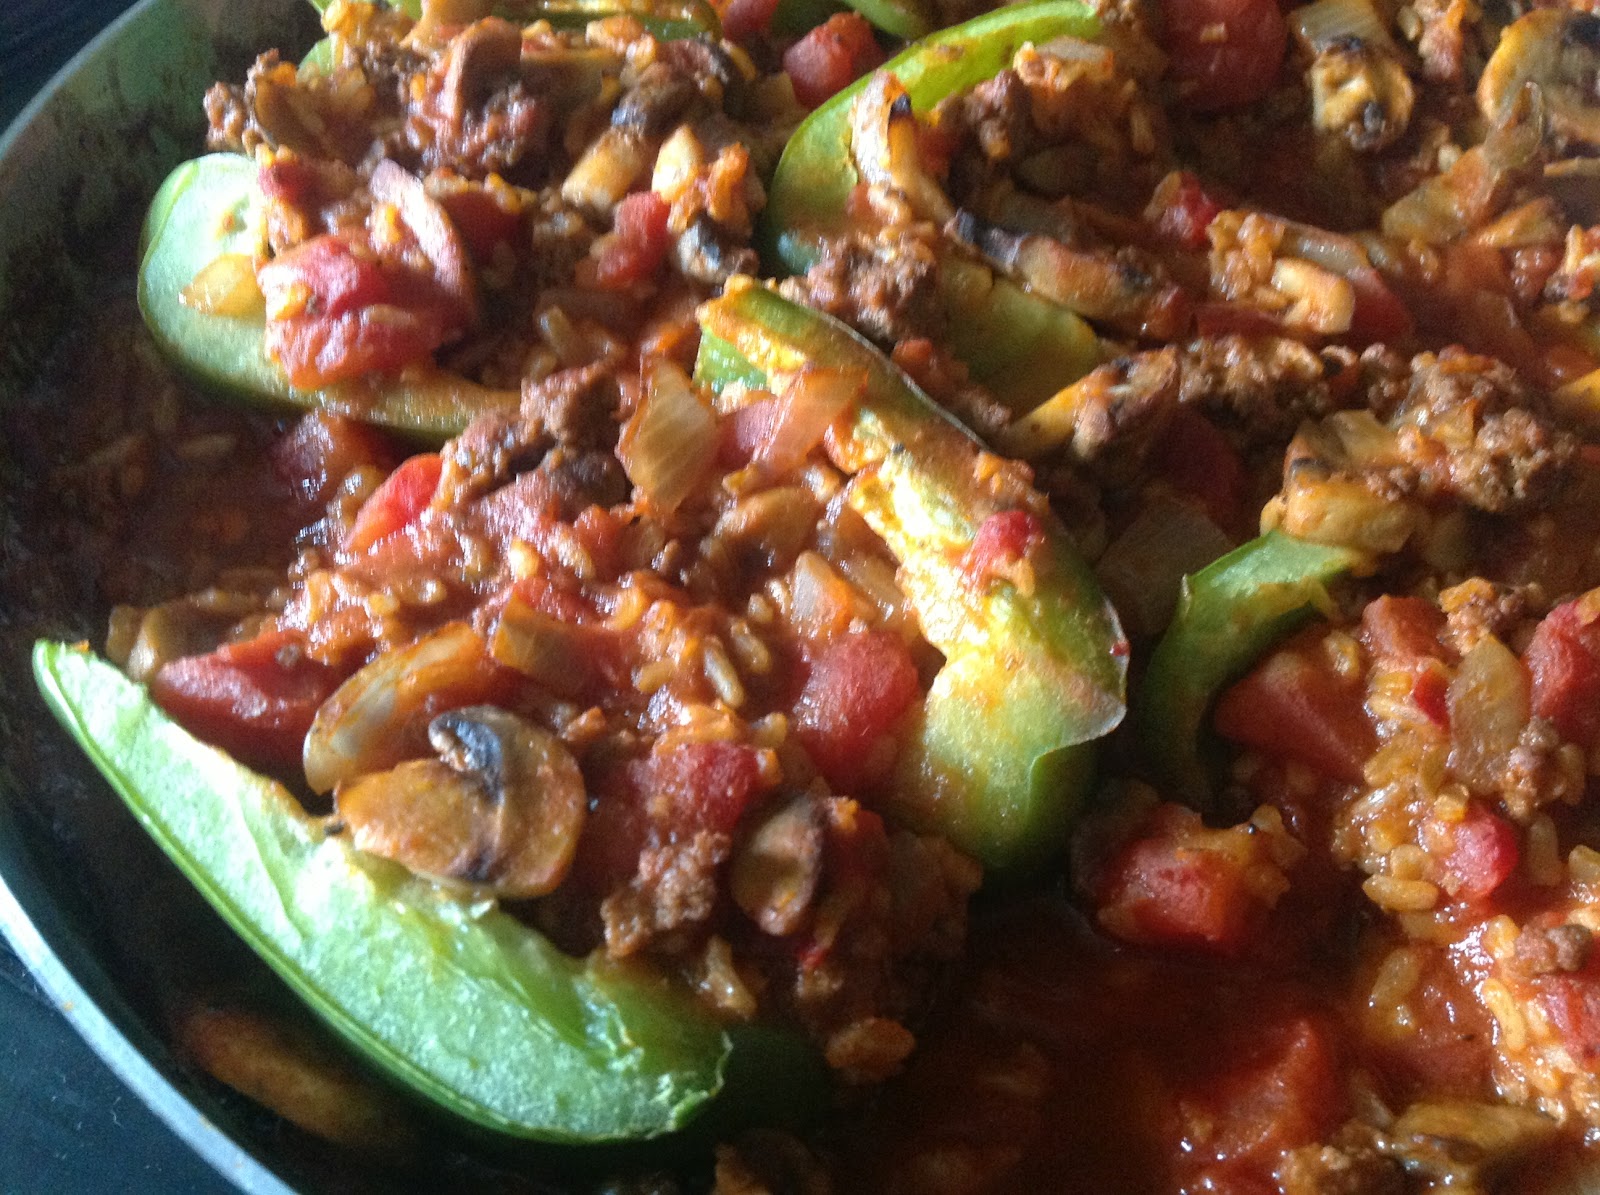 Don't Worry, Live Healthy: Stuffed Peppers